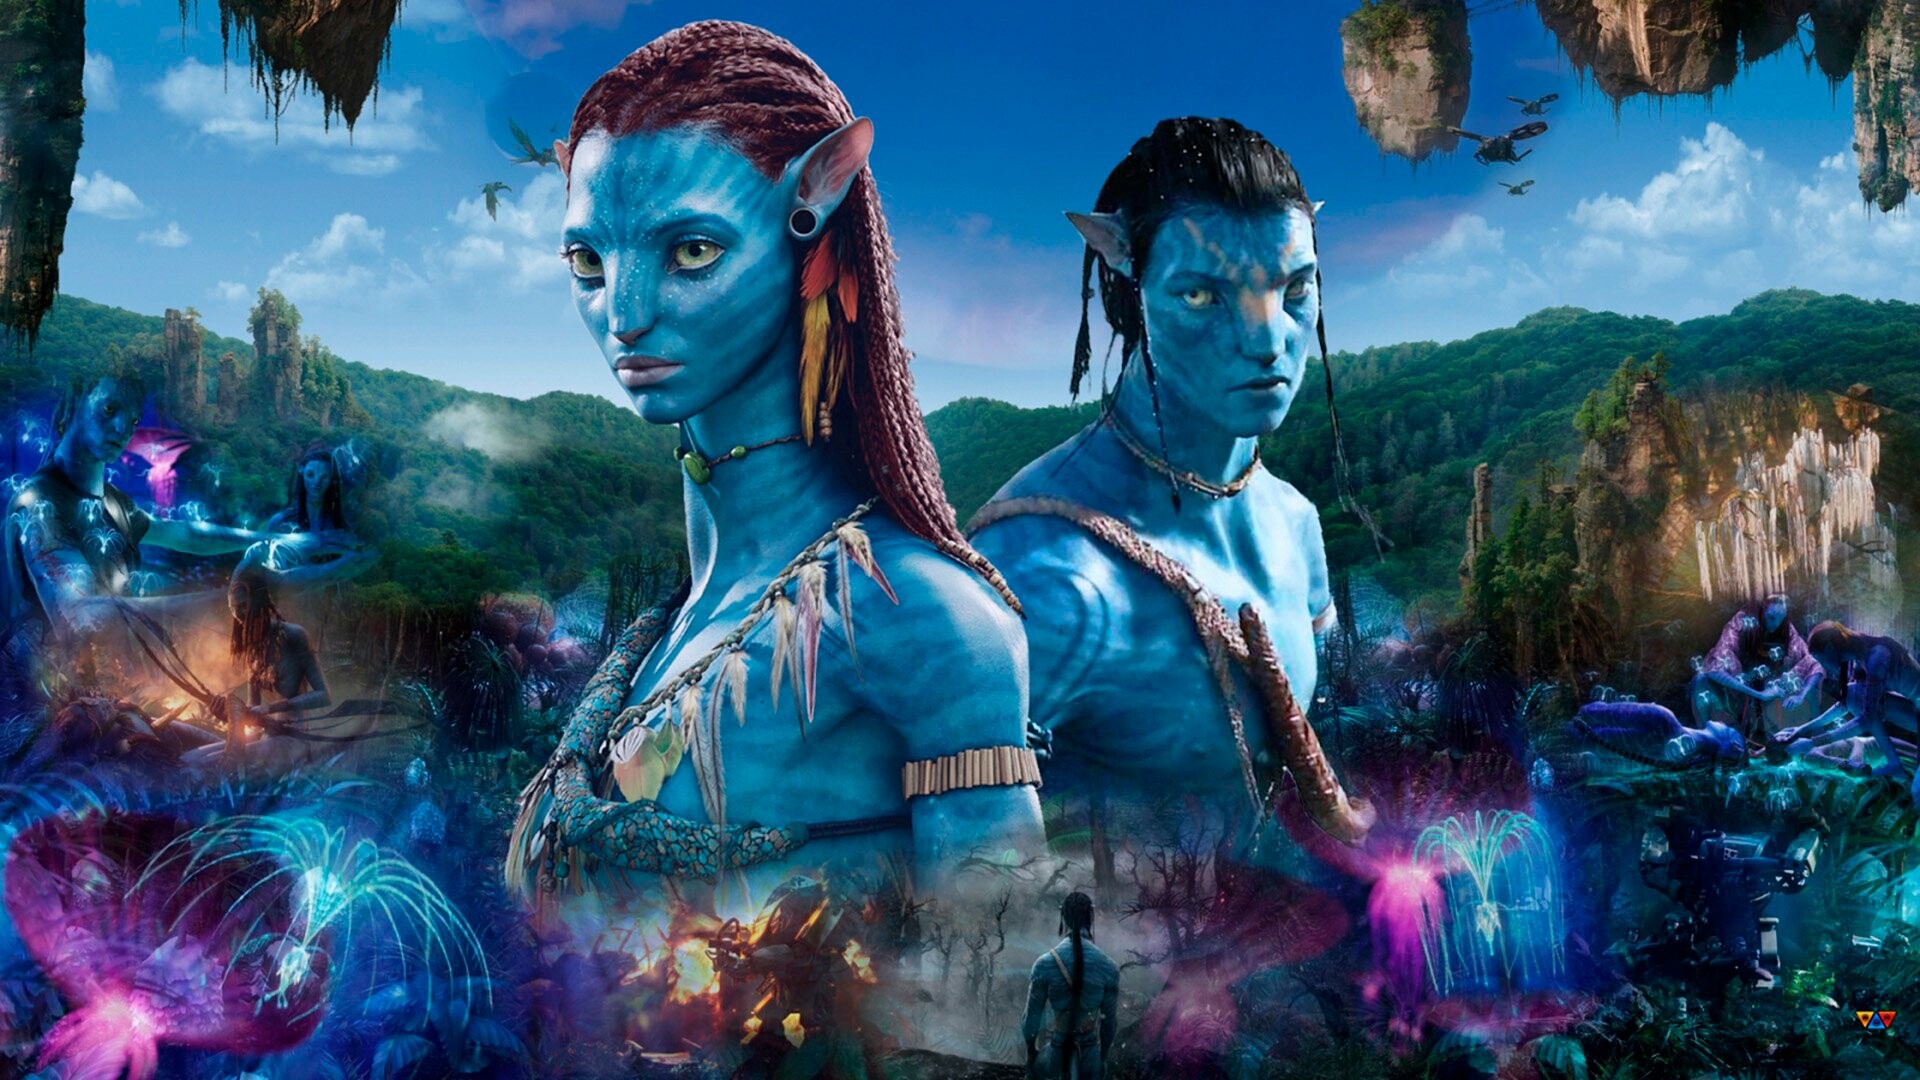 Avatar wallpapers, Top free backgrounds, Movie, 1920x1080 Full HD Desktop